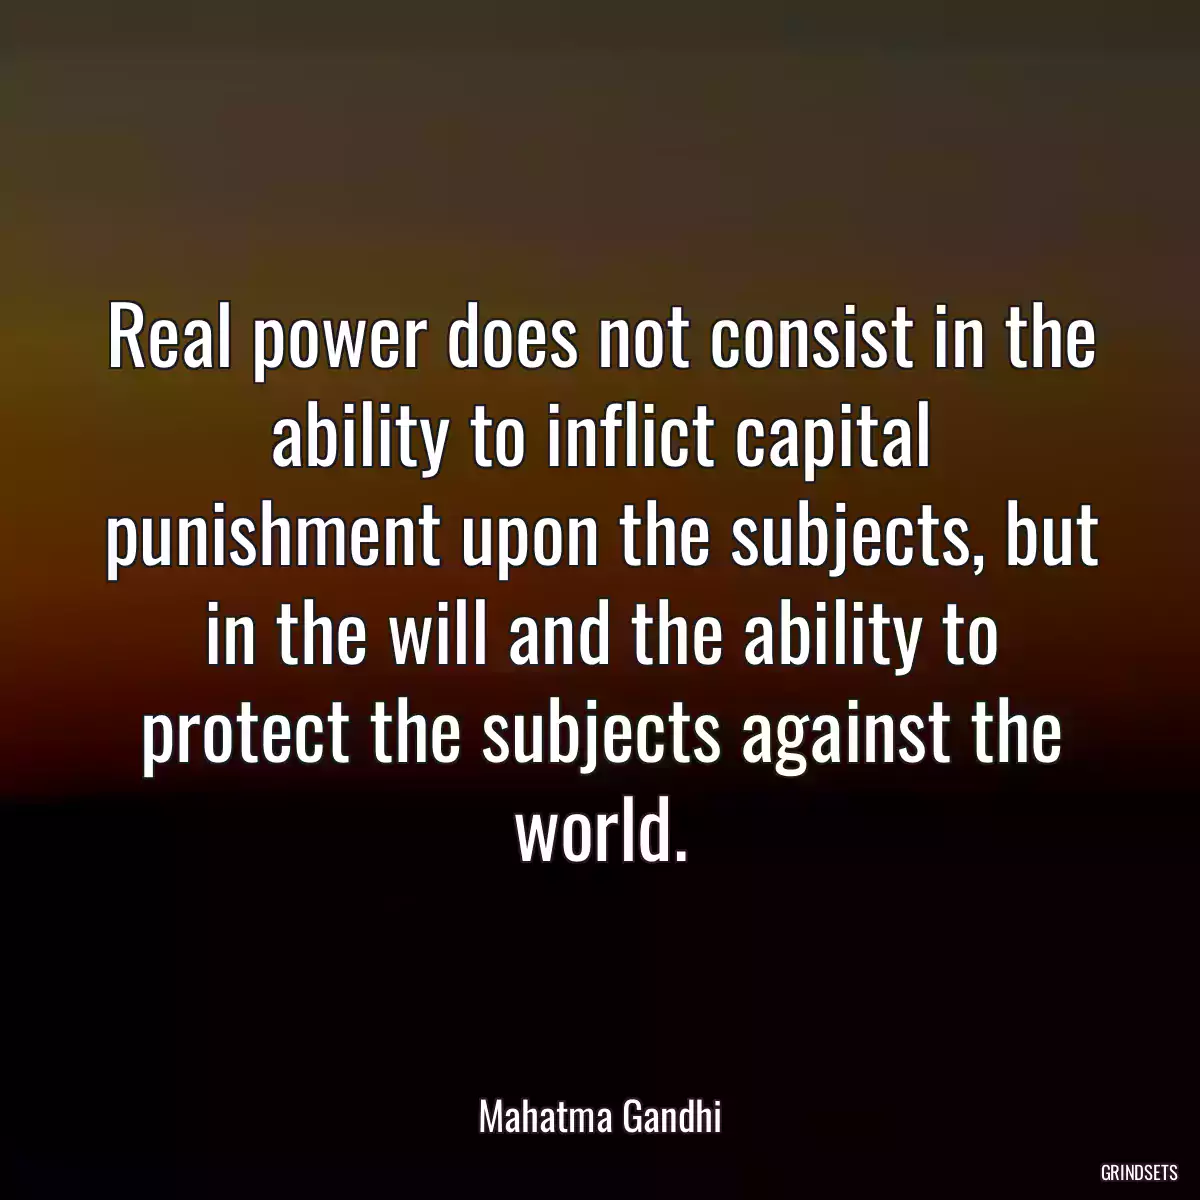 Real power does not consist in the ability to inflict capital punishment upon the subjects, but in the will and the ability to protect the subjects against the world.